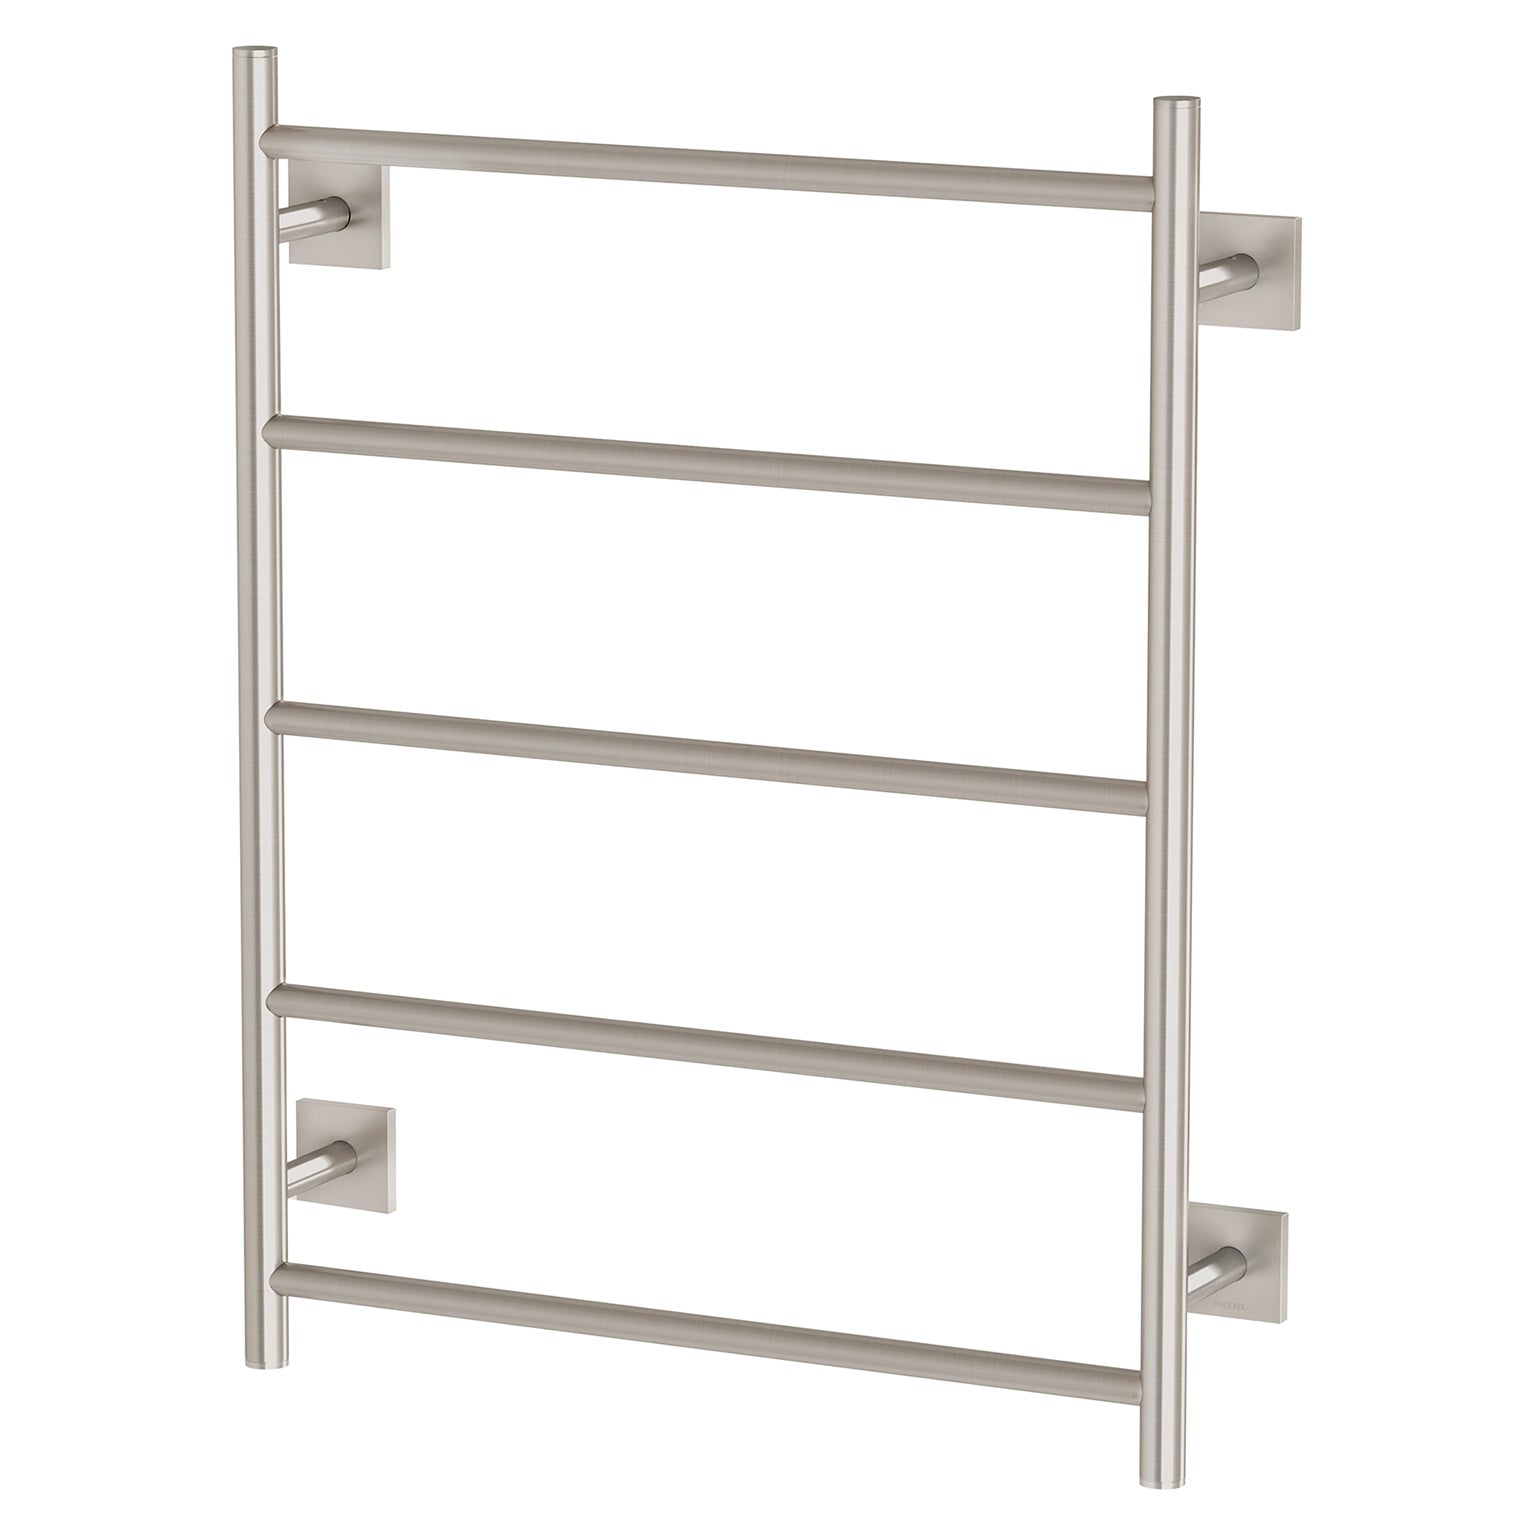 PHOENIX RADII NON-HEATED TOWEL LADDER  SQUARE PLATE BRUSHED NICKEL 550MM X 740MM